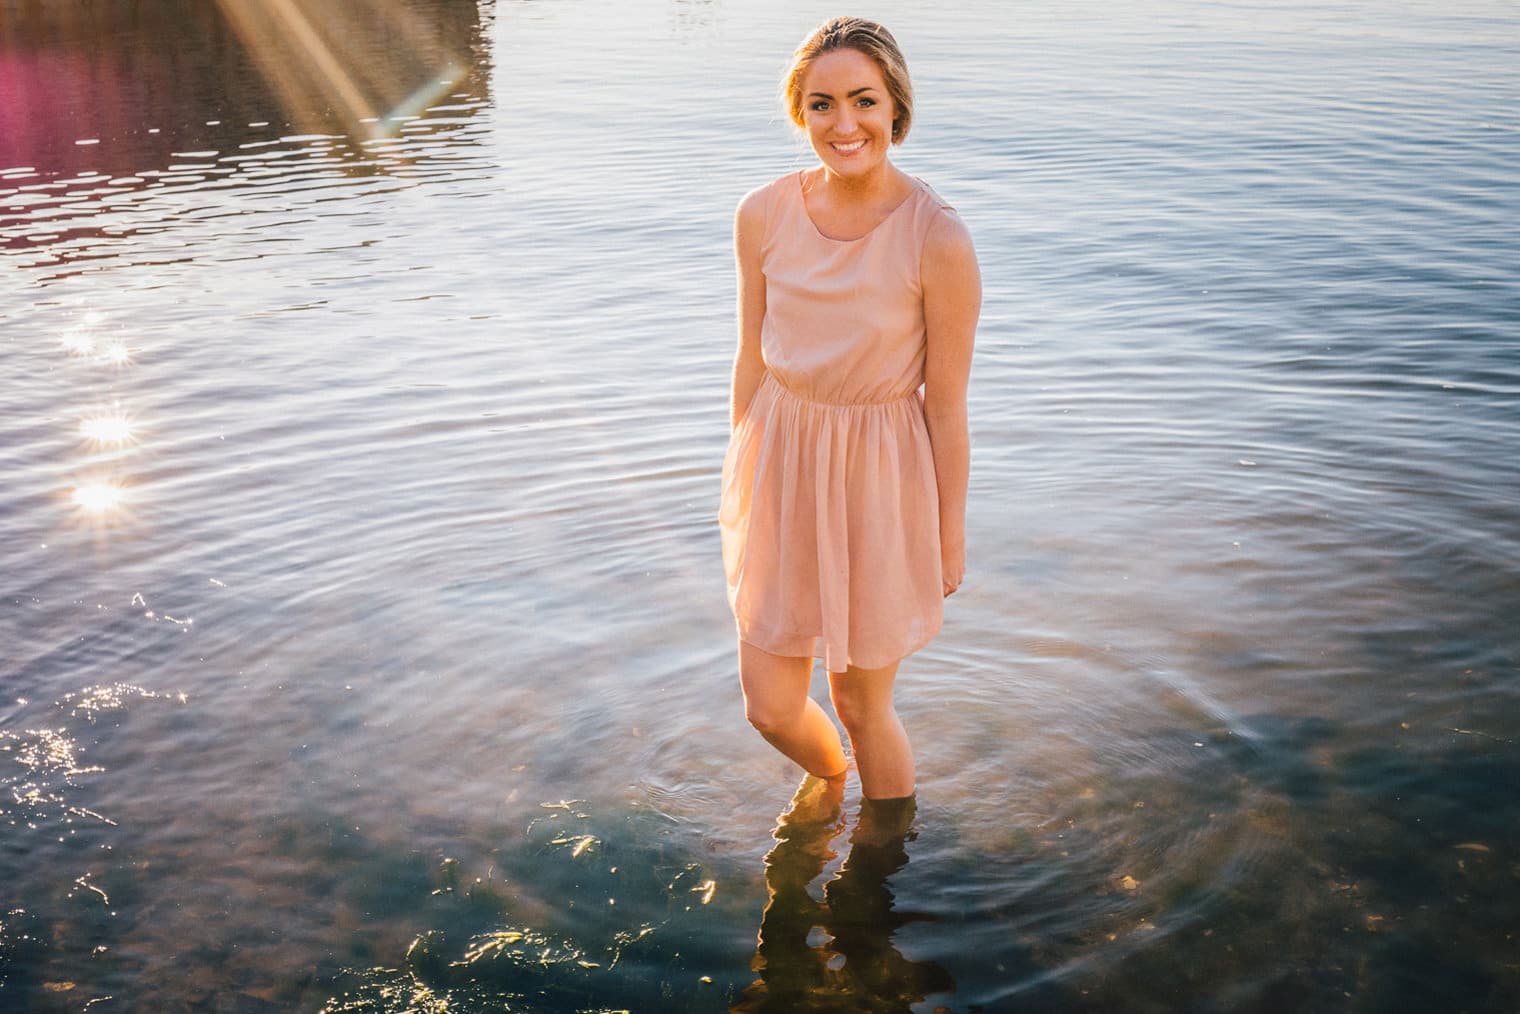 Beloved photo session at the beach in Gothenburg. In the water enjoying the setting sun.